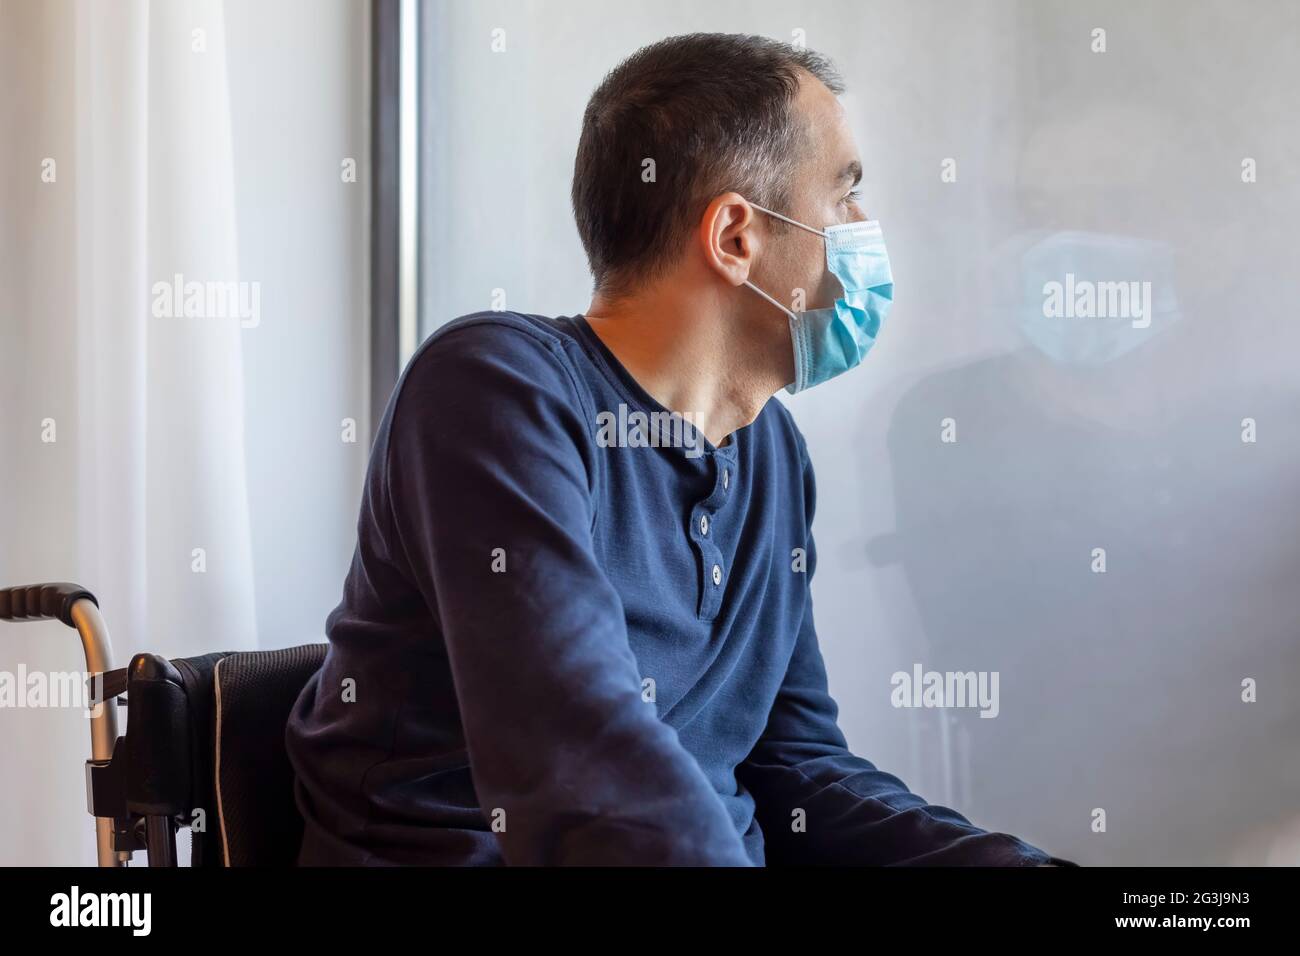 Young man with medical protective mask looking out the window. Man in isolation at home. Focus on his face. Stock Photo